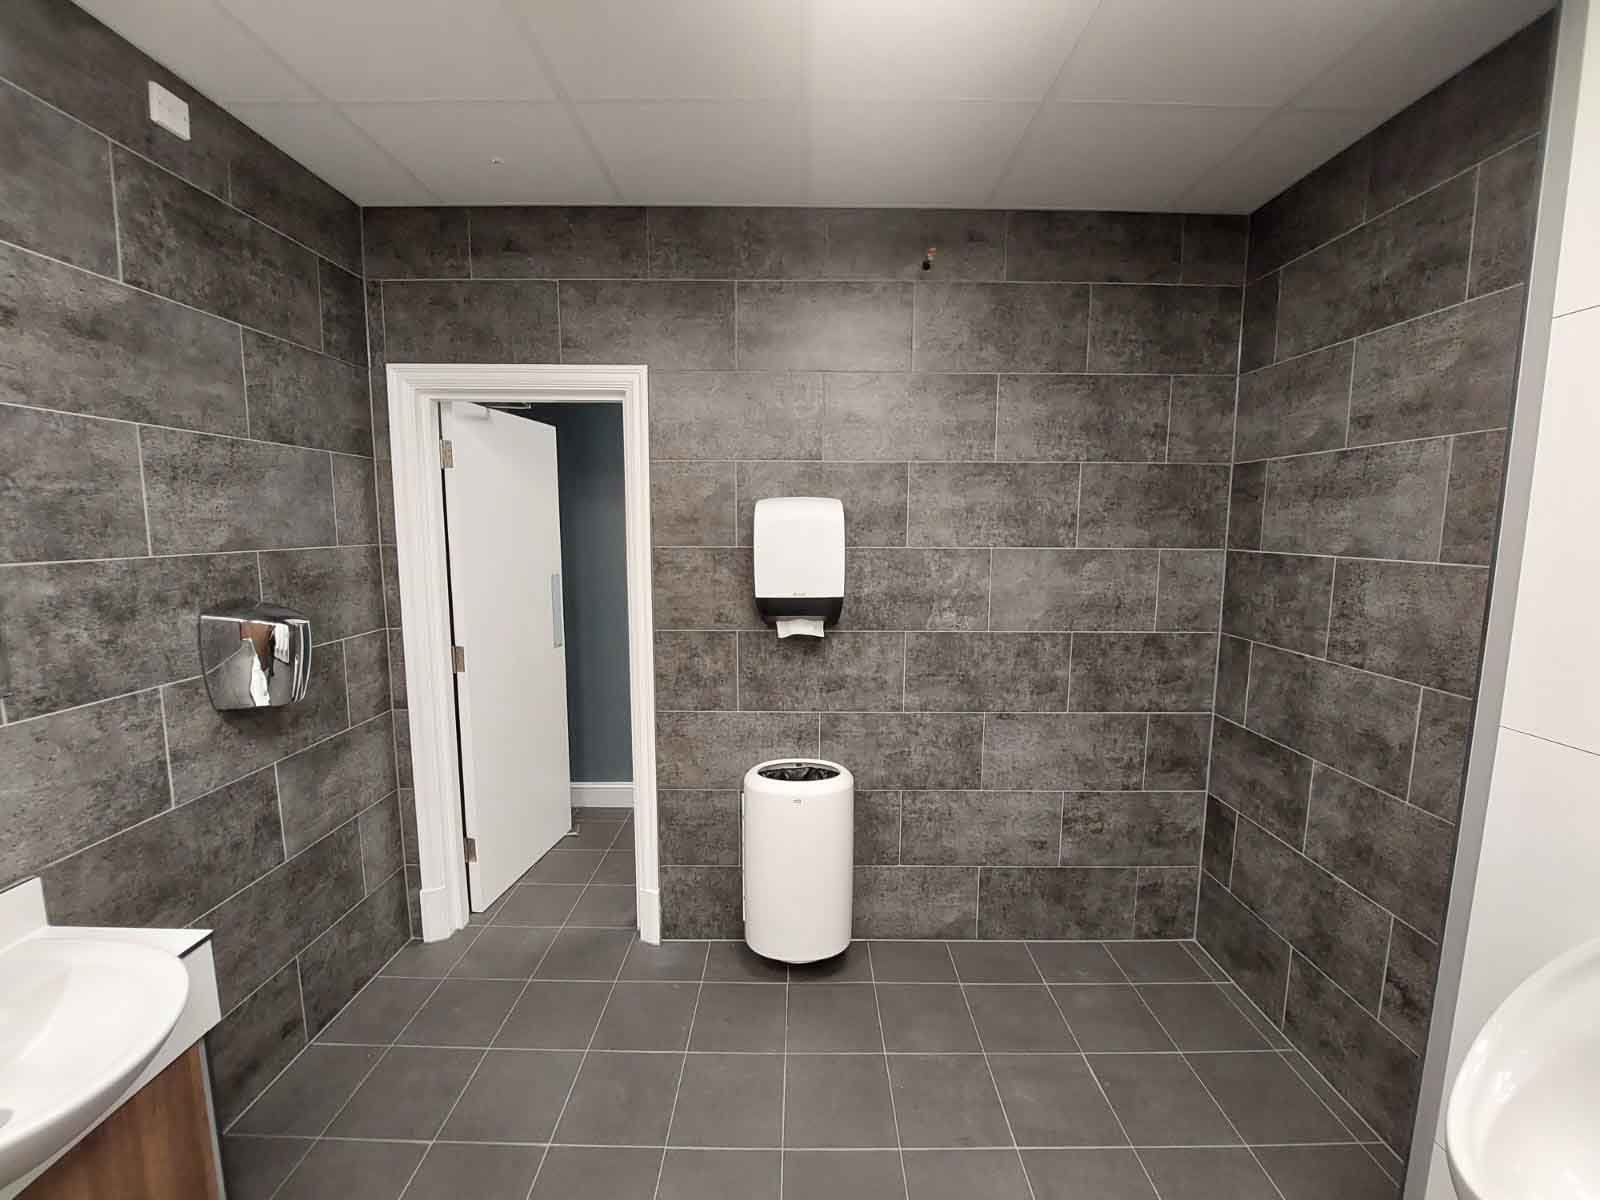 washroom entrance area with grey concrete tiles, a hand dryer, dispenser and bin at kia oval.jpg